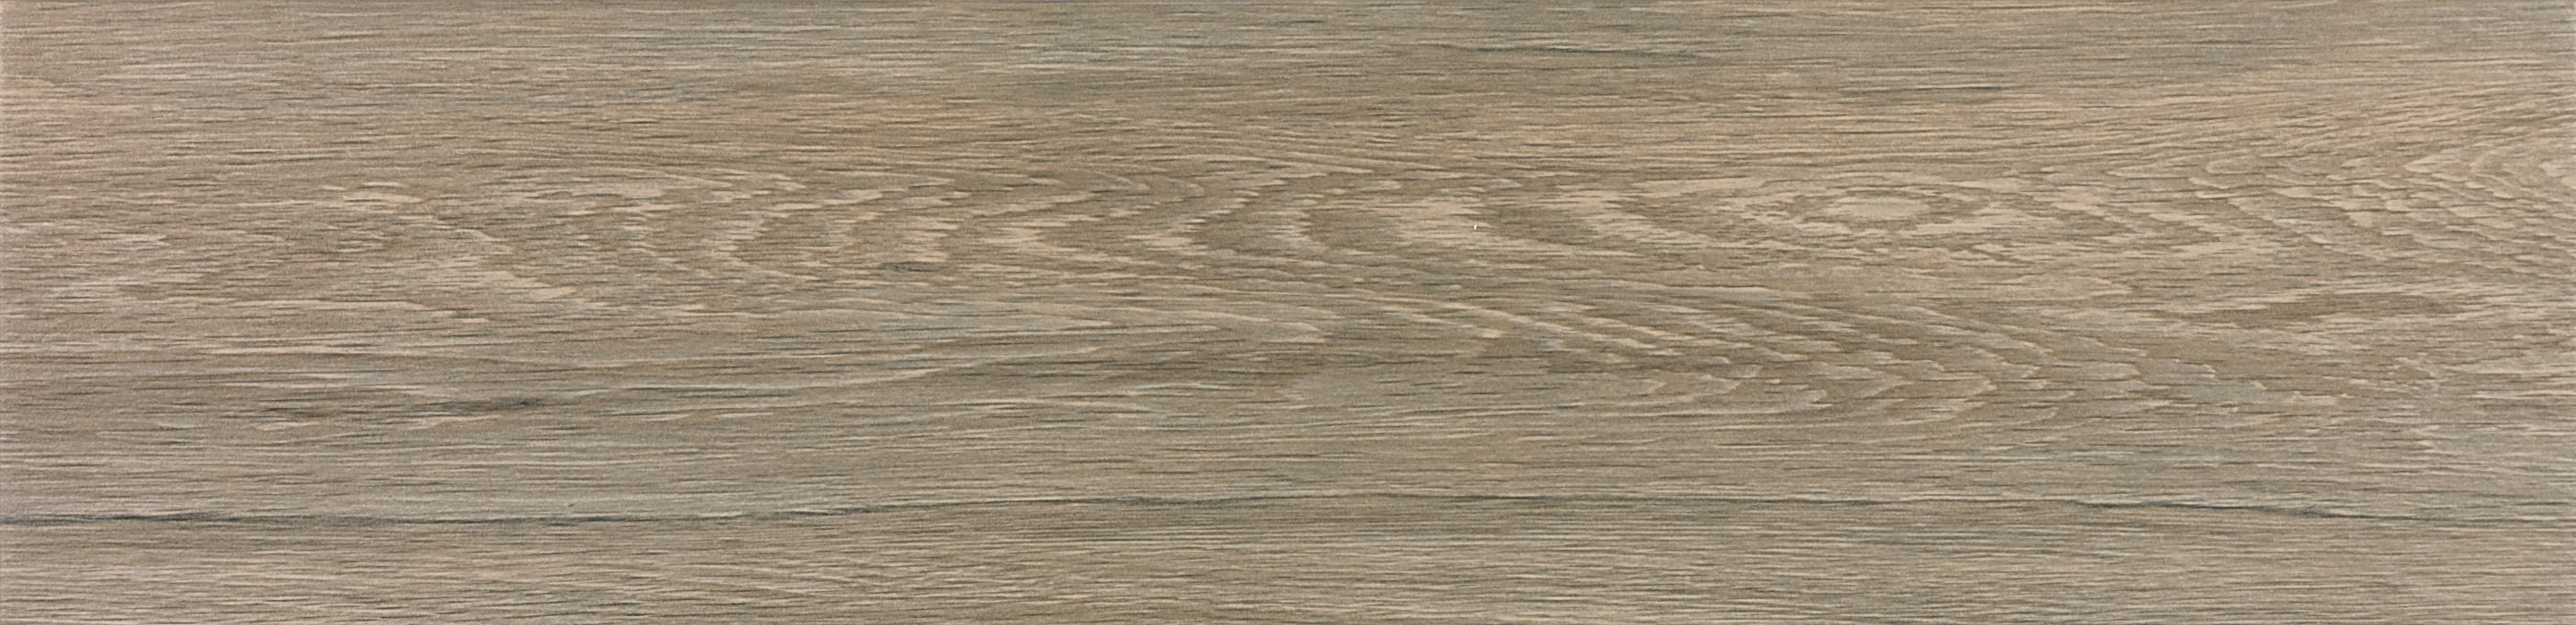 saddle pattern glazed porcelain field tile from vintagewood anatolia collection distributed by surface group international matte finish pressed edge 6x24 rectangle shape